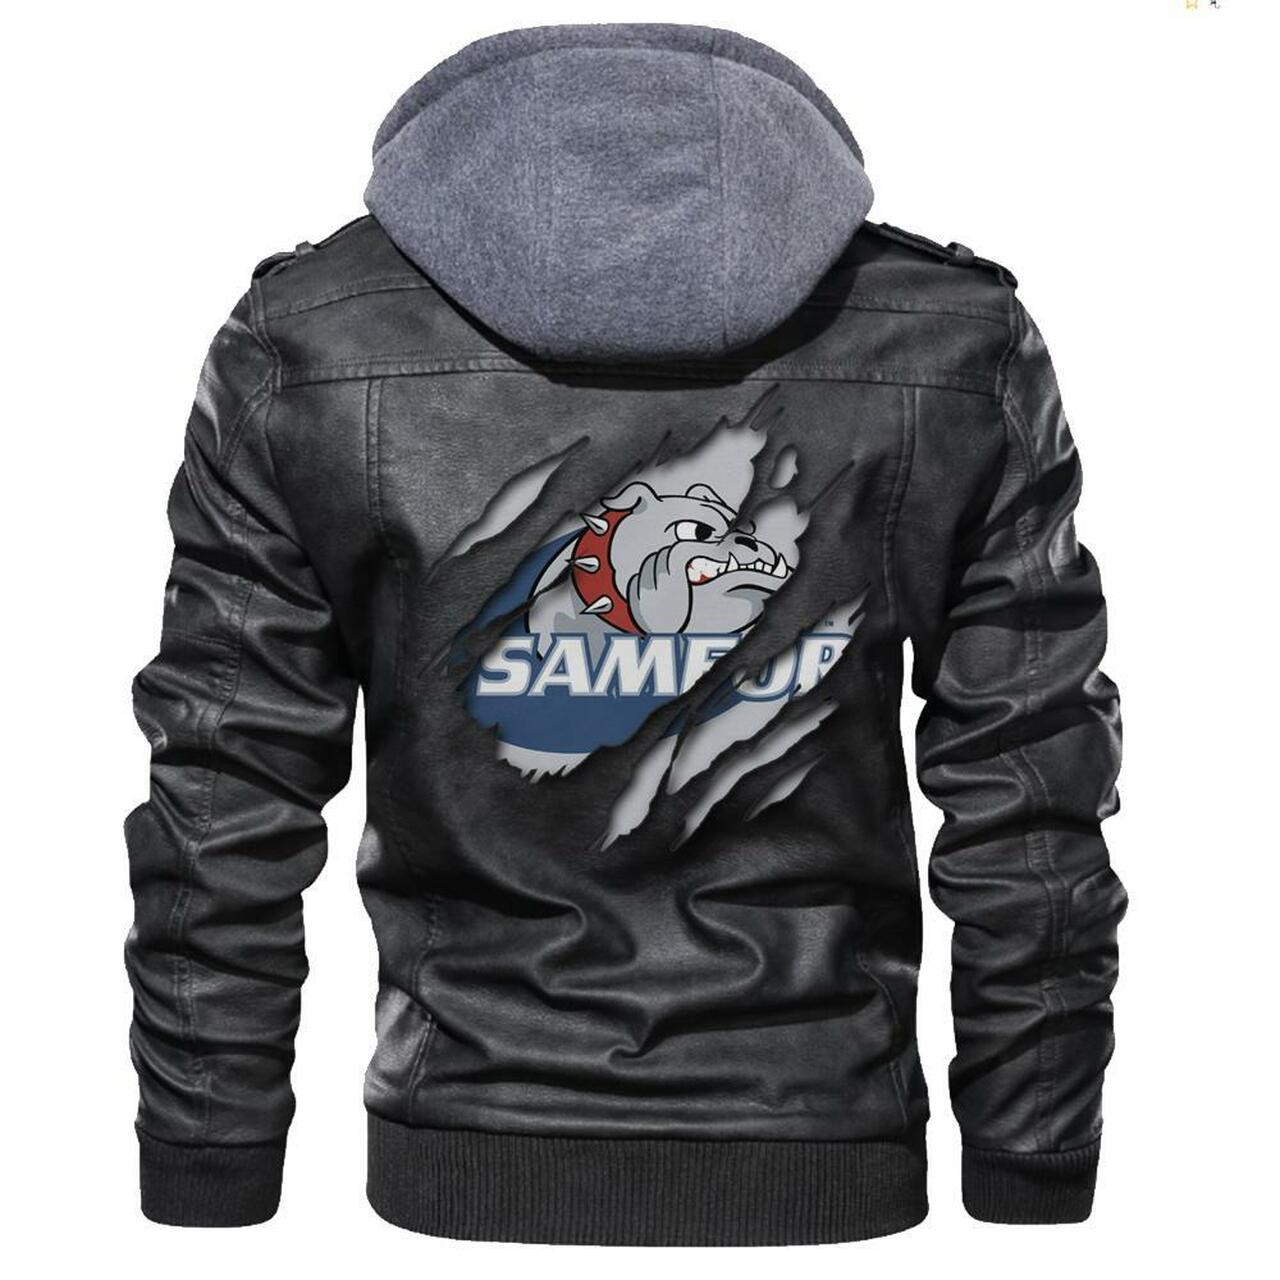 Check out and find the right leather jacket below 125